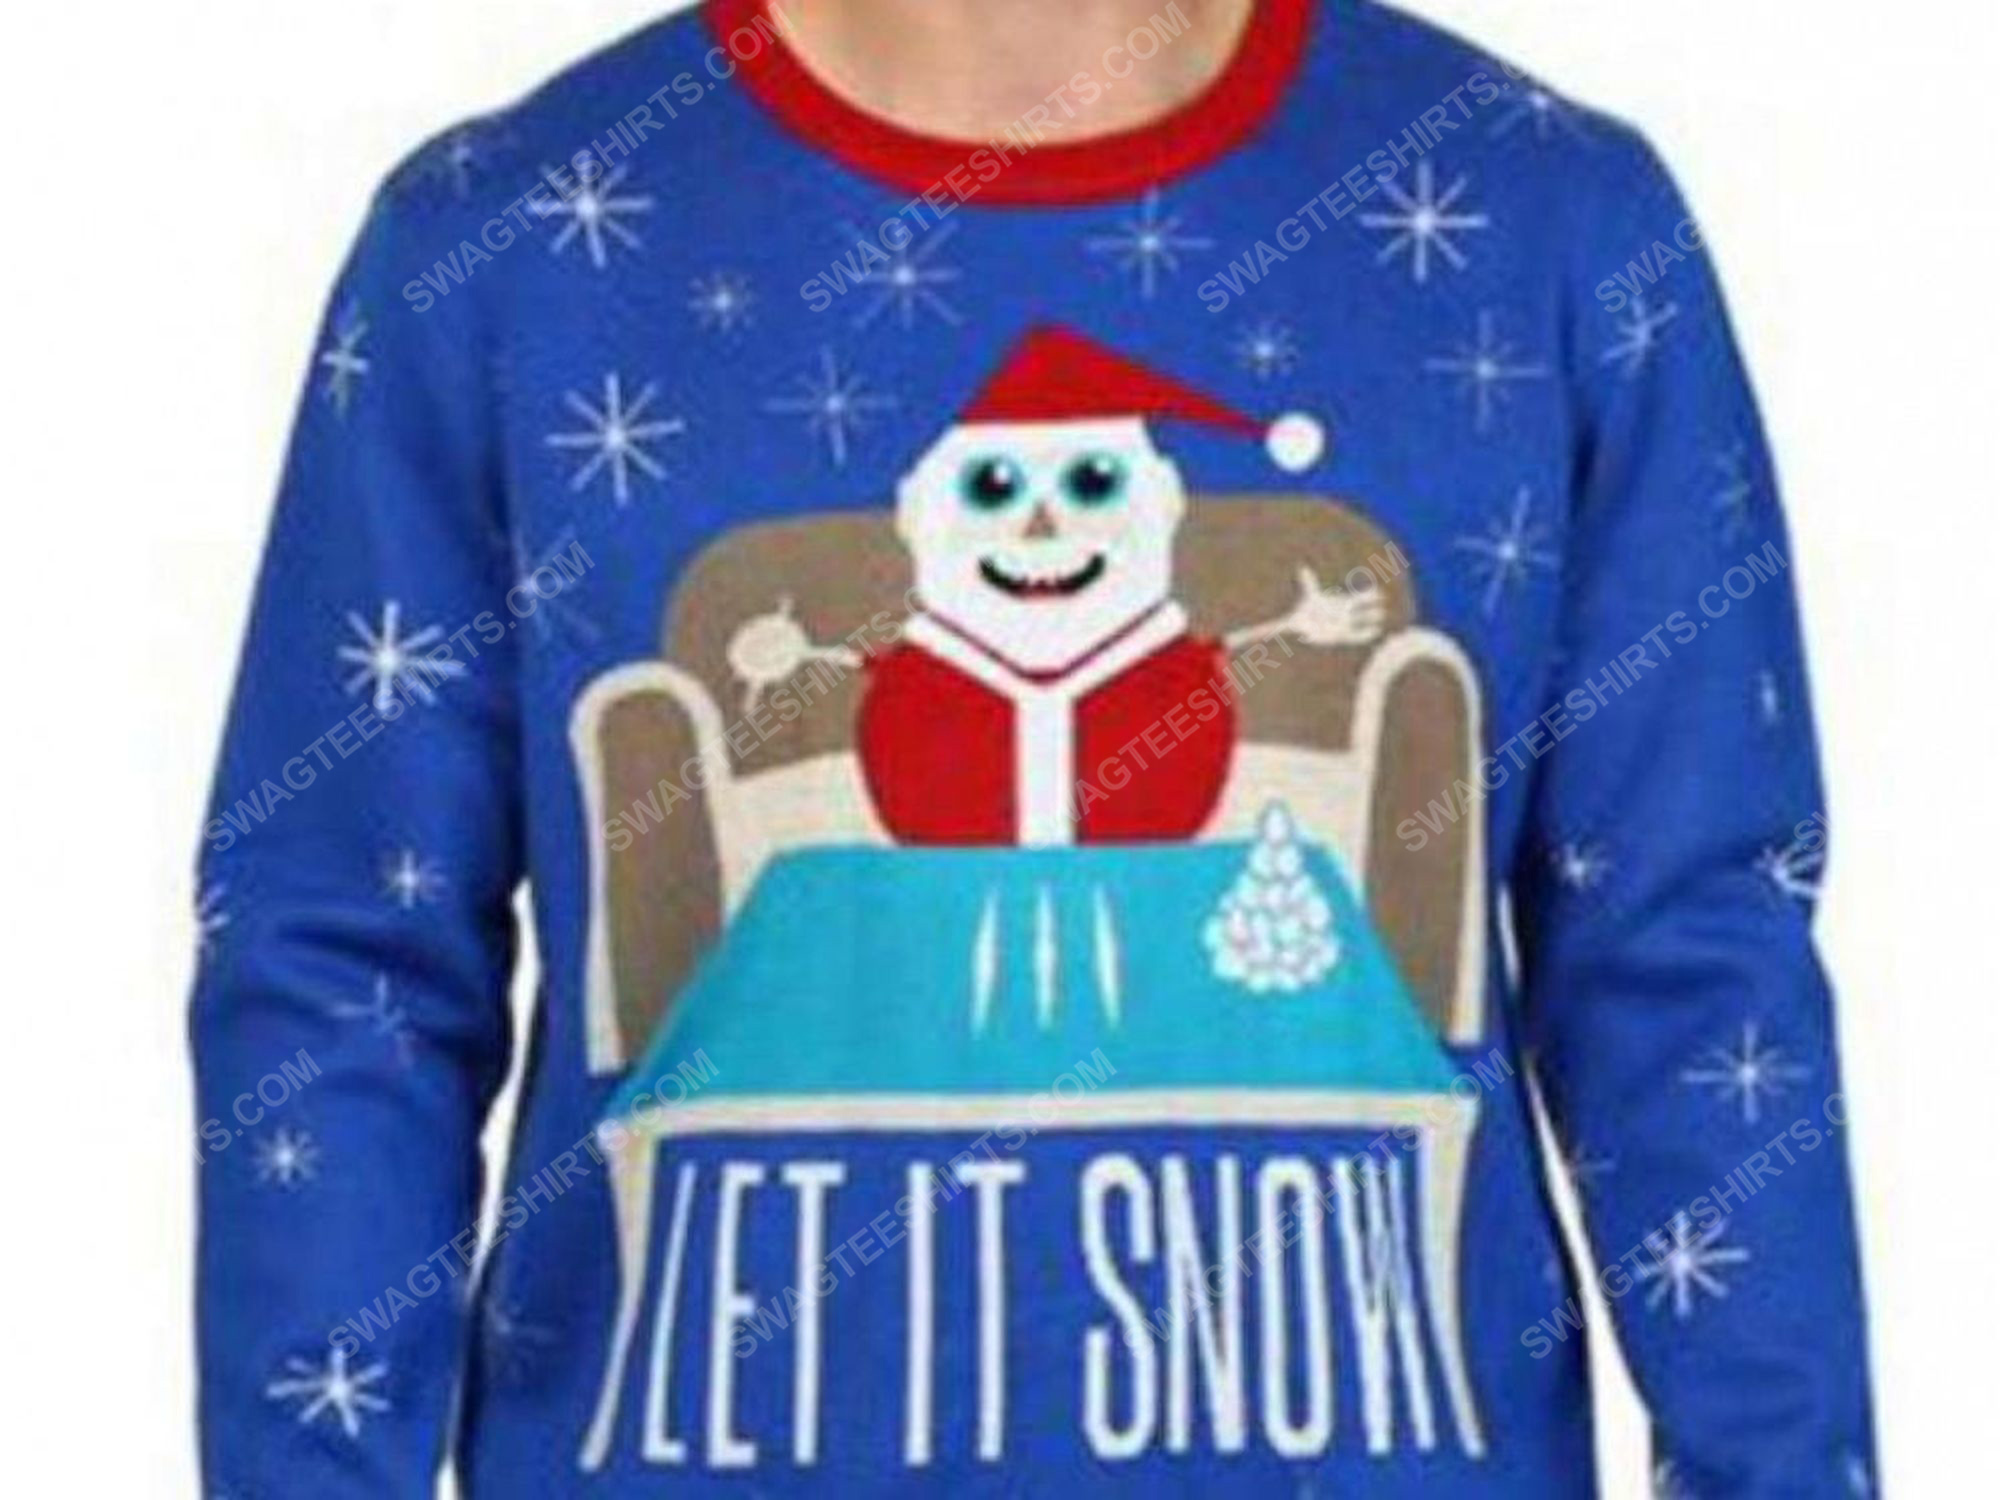 [special edition] Christmas party let it snow cocaine full print ugly christmas sweater – maria